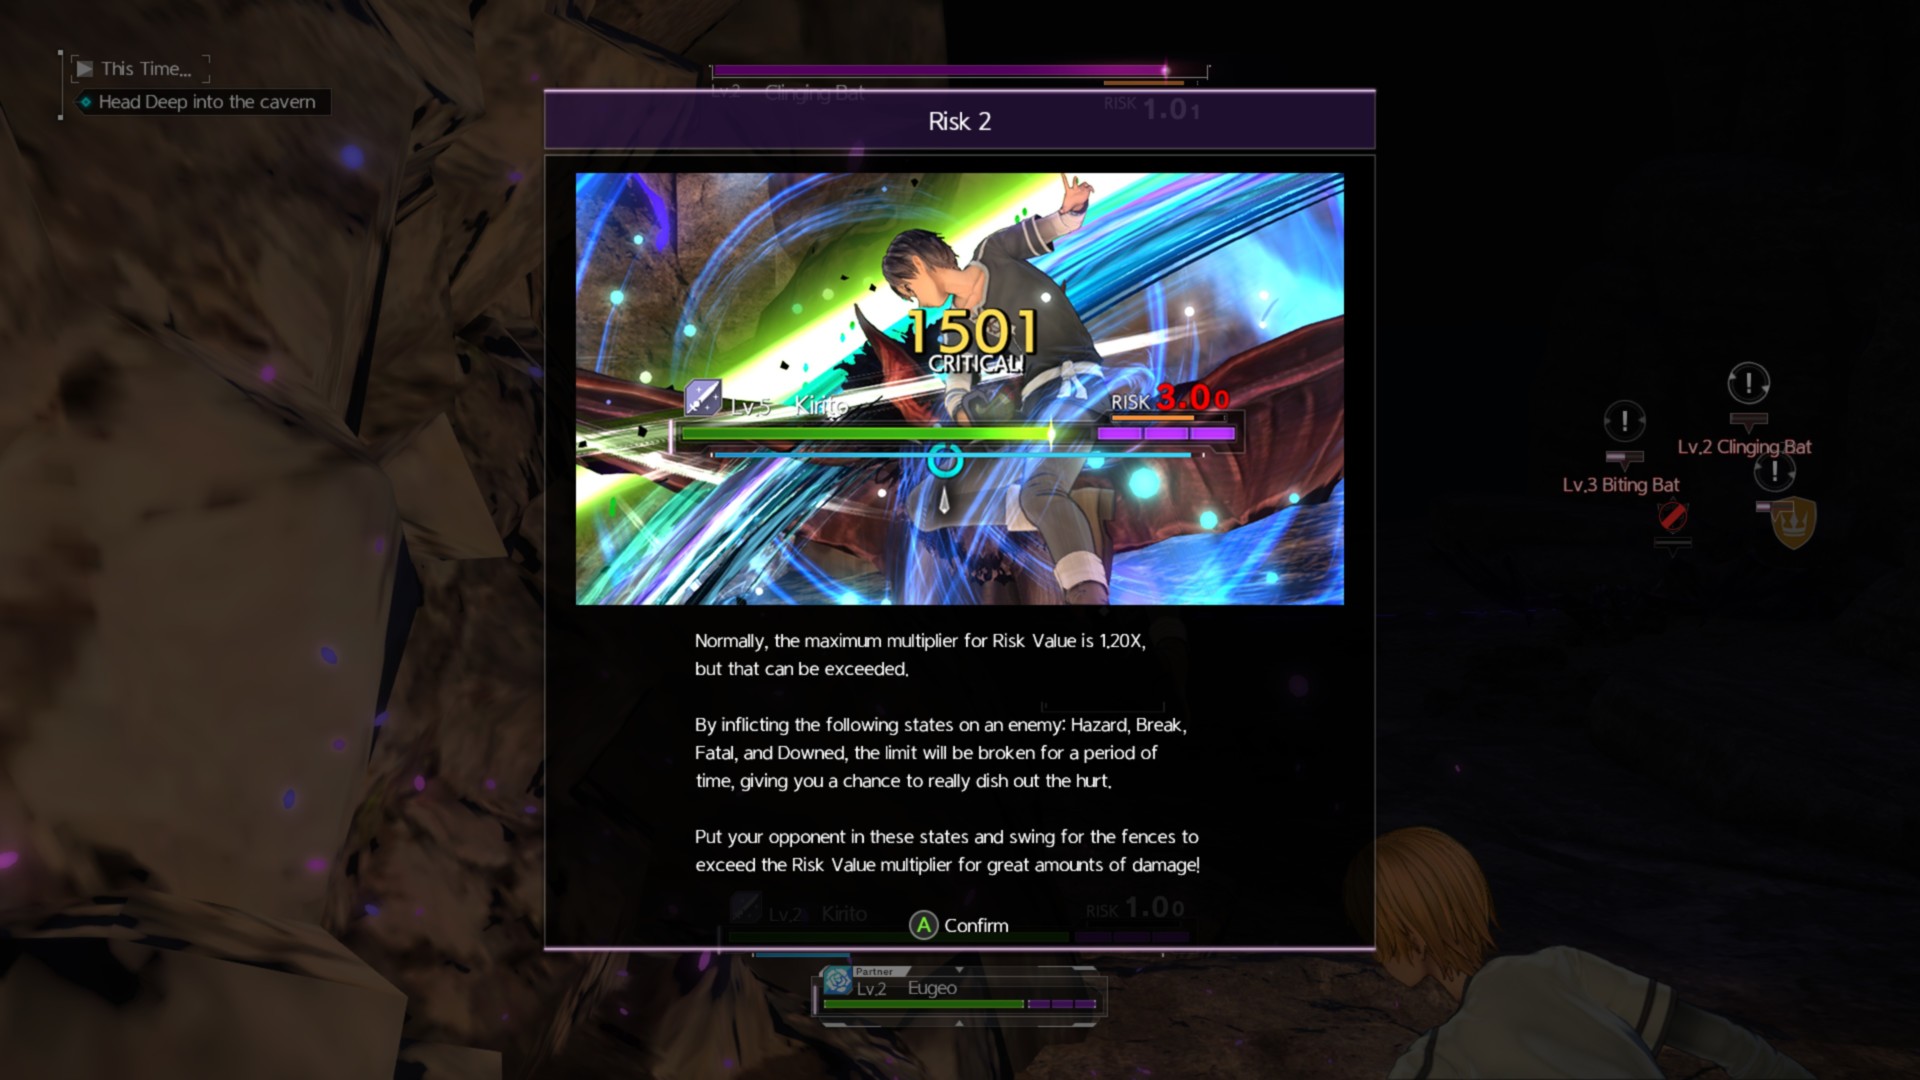 This Quest Pro Game Recreates Sword Art Online's Lovably Bad User Interface